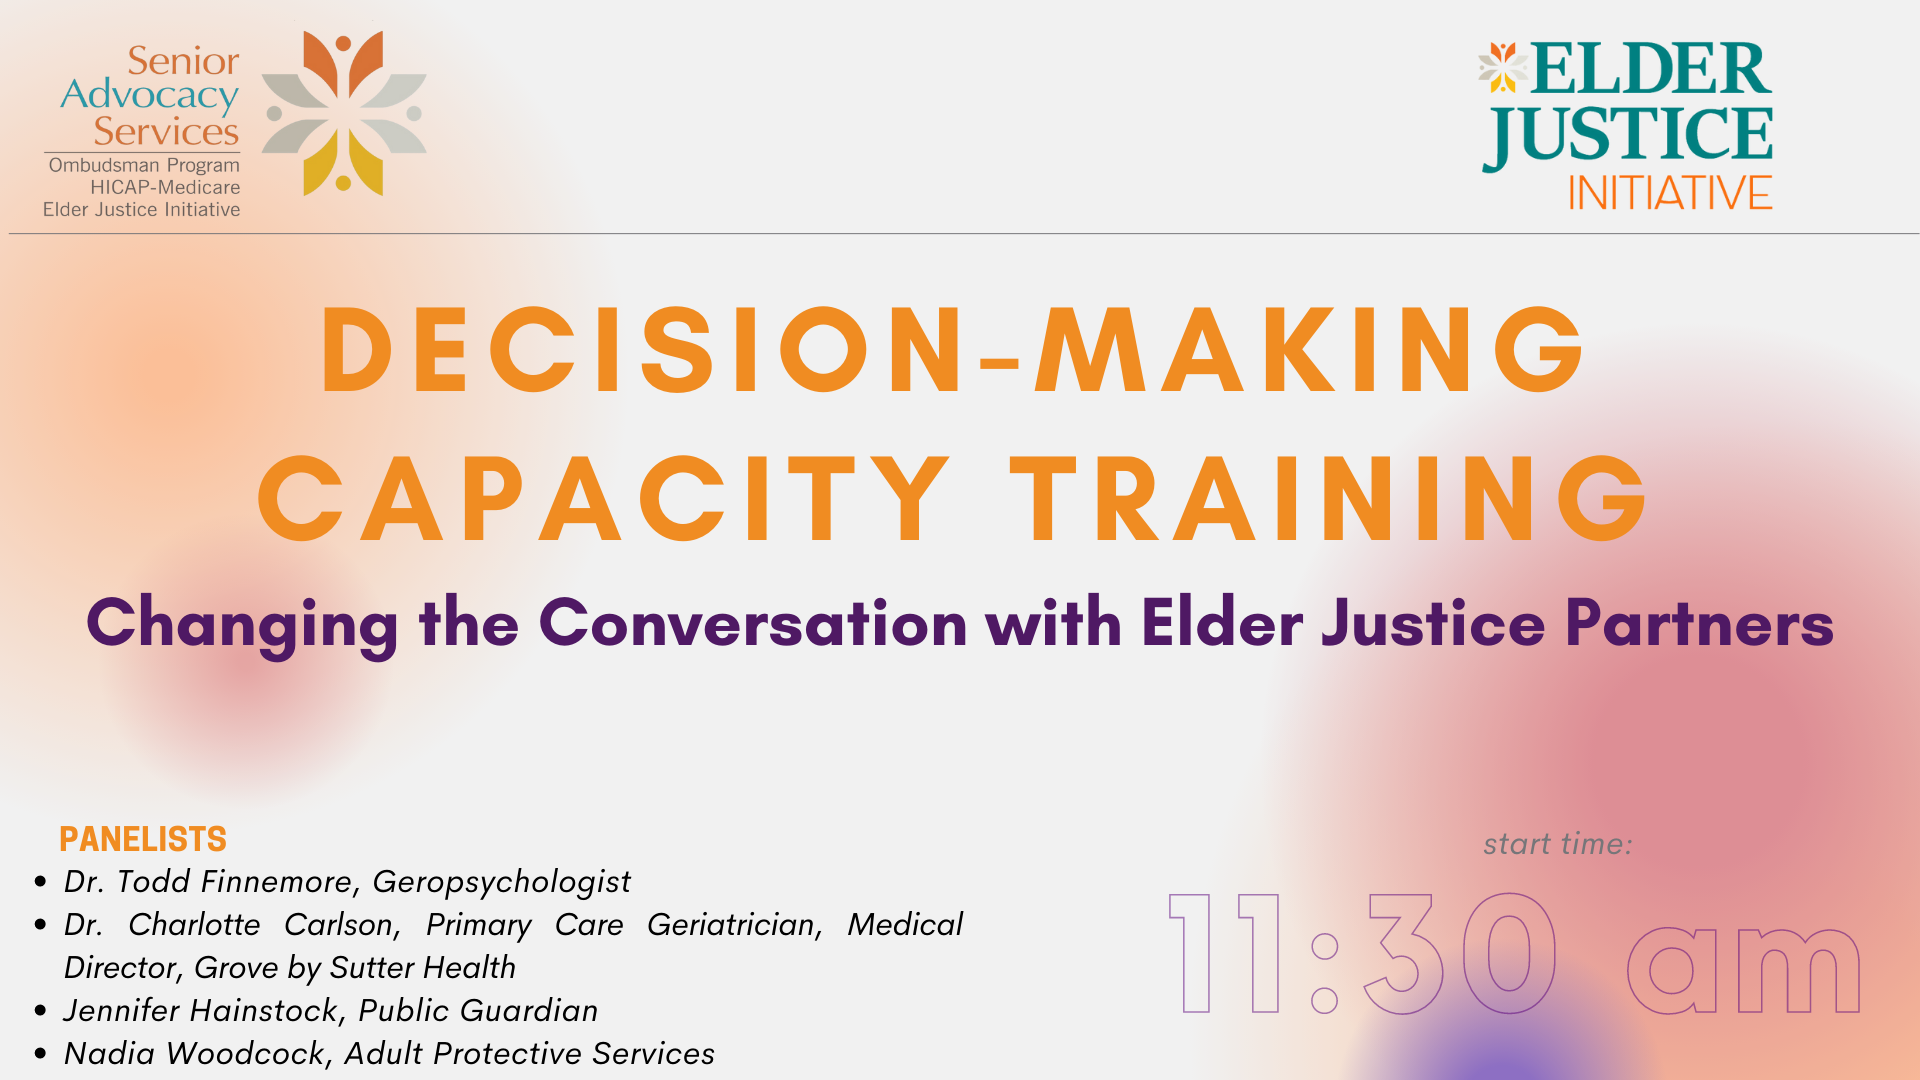 June 14 Decision-Making Capacity Training - Changing the Conversation with Elder Justice Partners